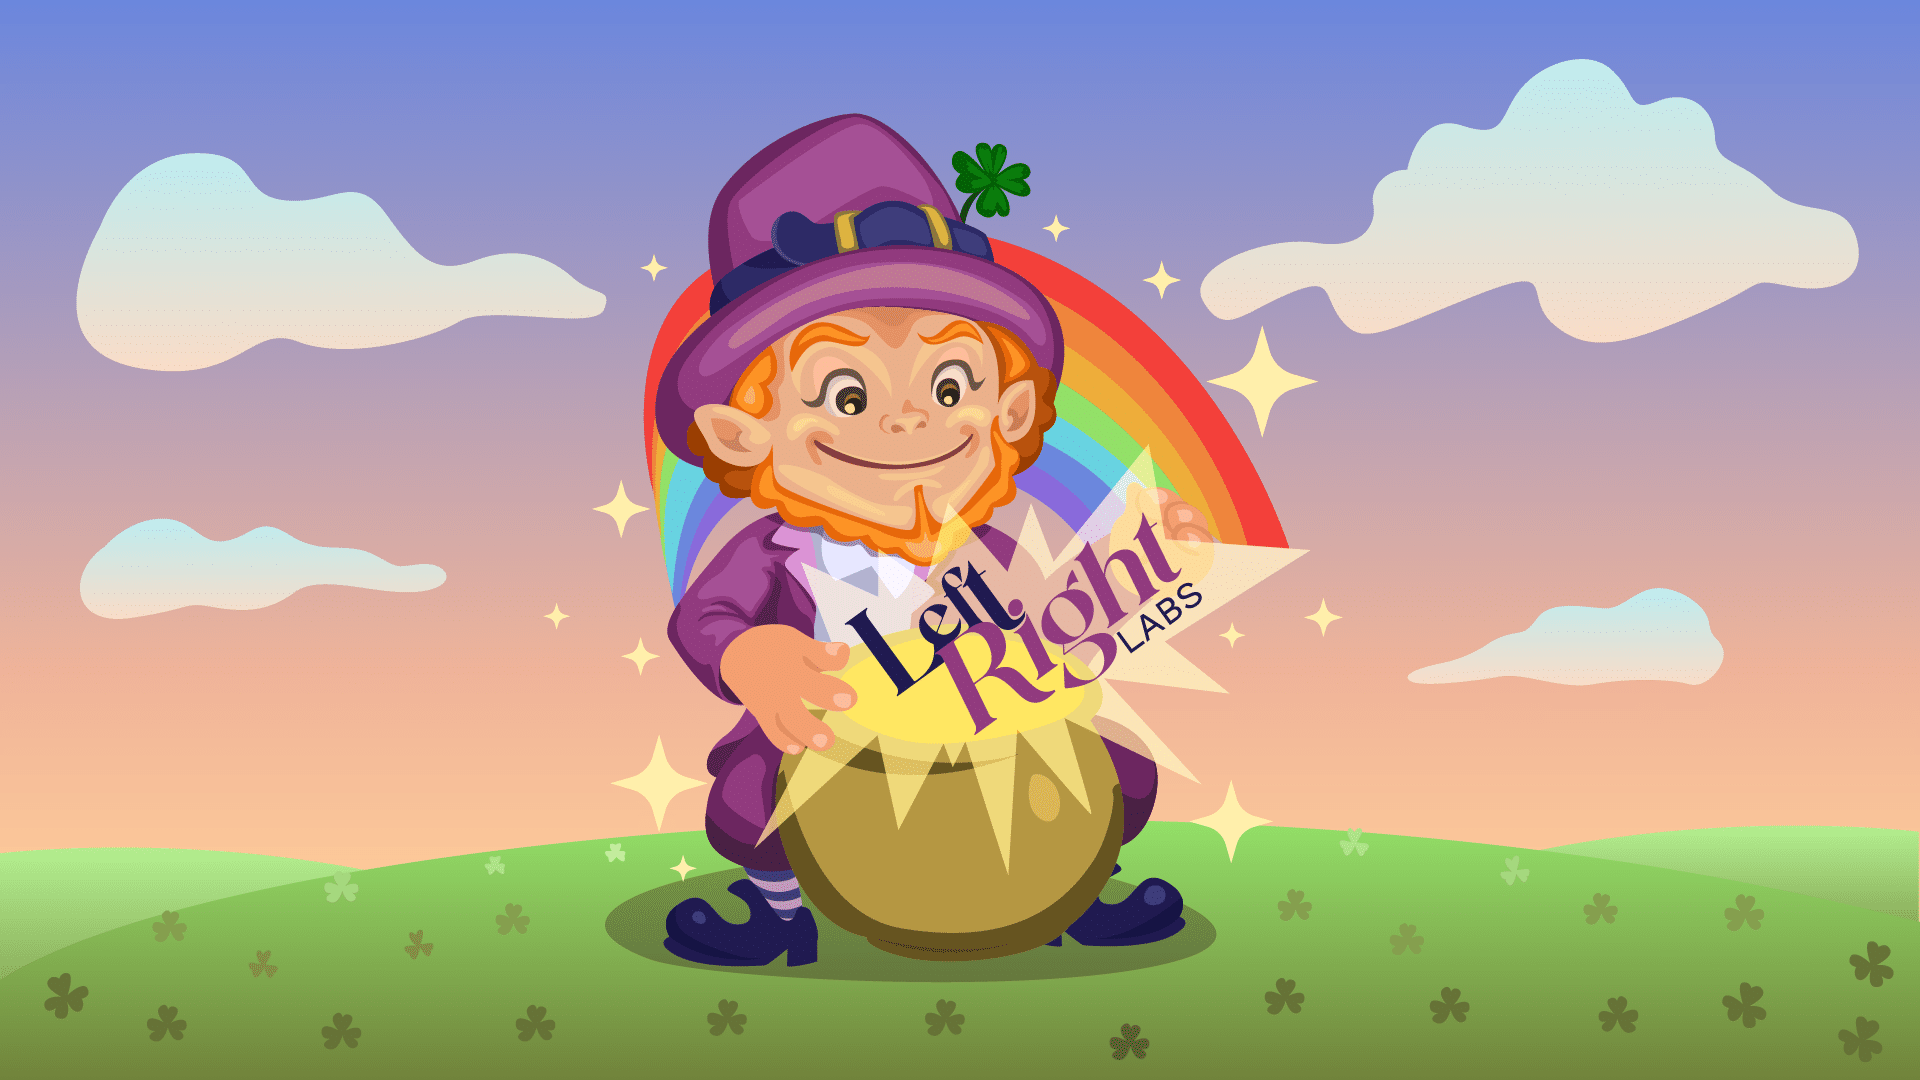 Leprechaun pulling a Left Right Labs logo out of a pot of gold